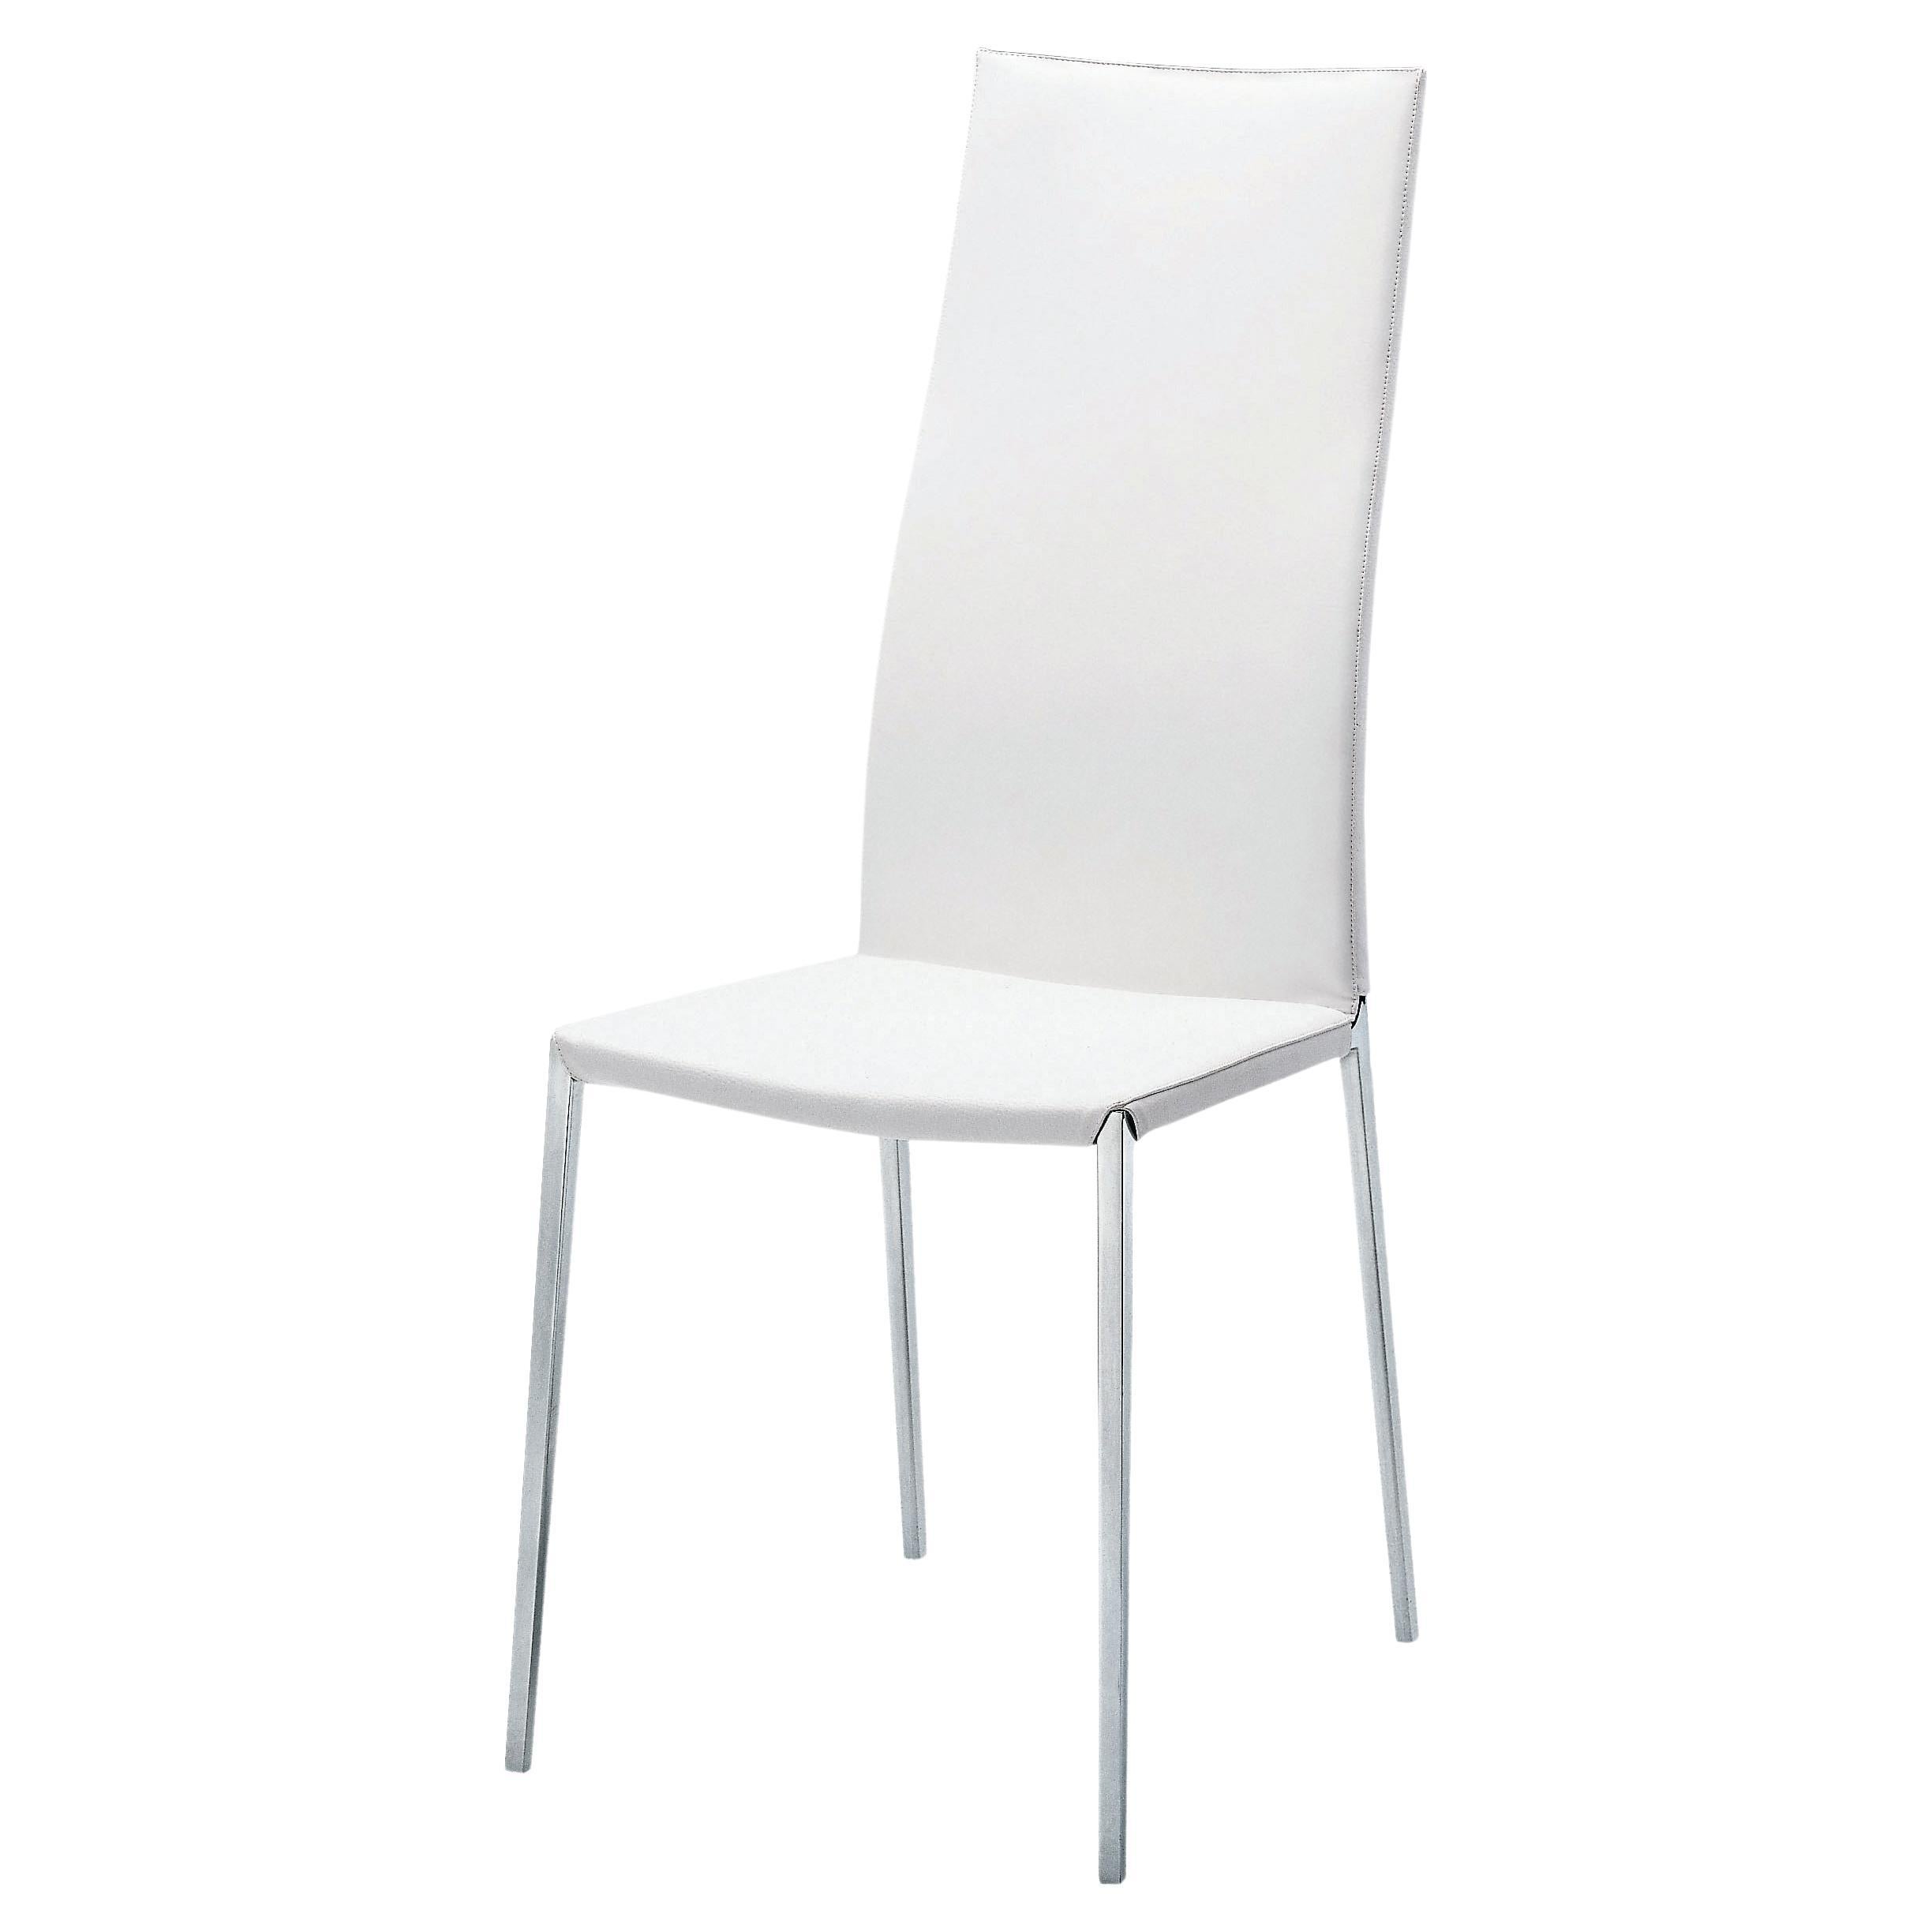 Zanotta Lialta Chair in White Upholstery with Polished Aluminum Frame